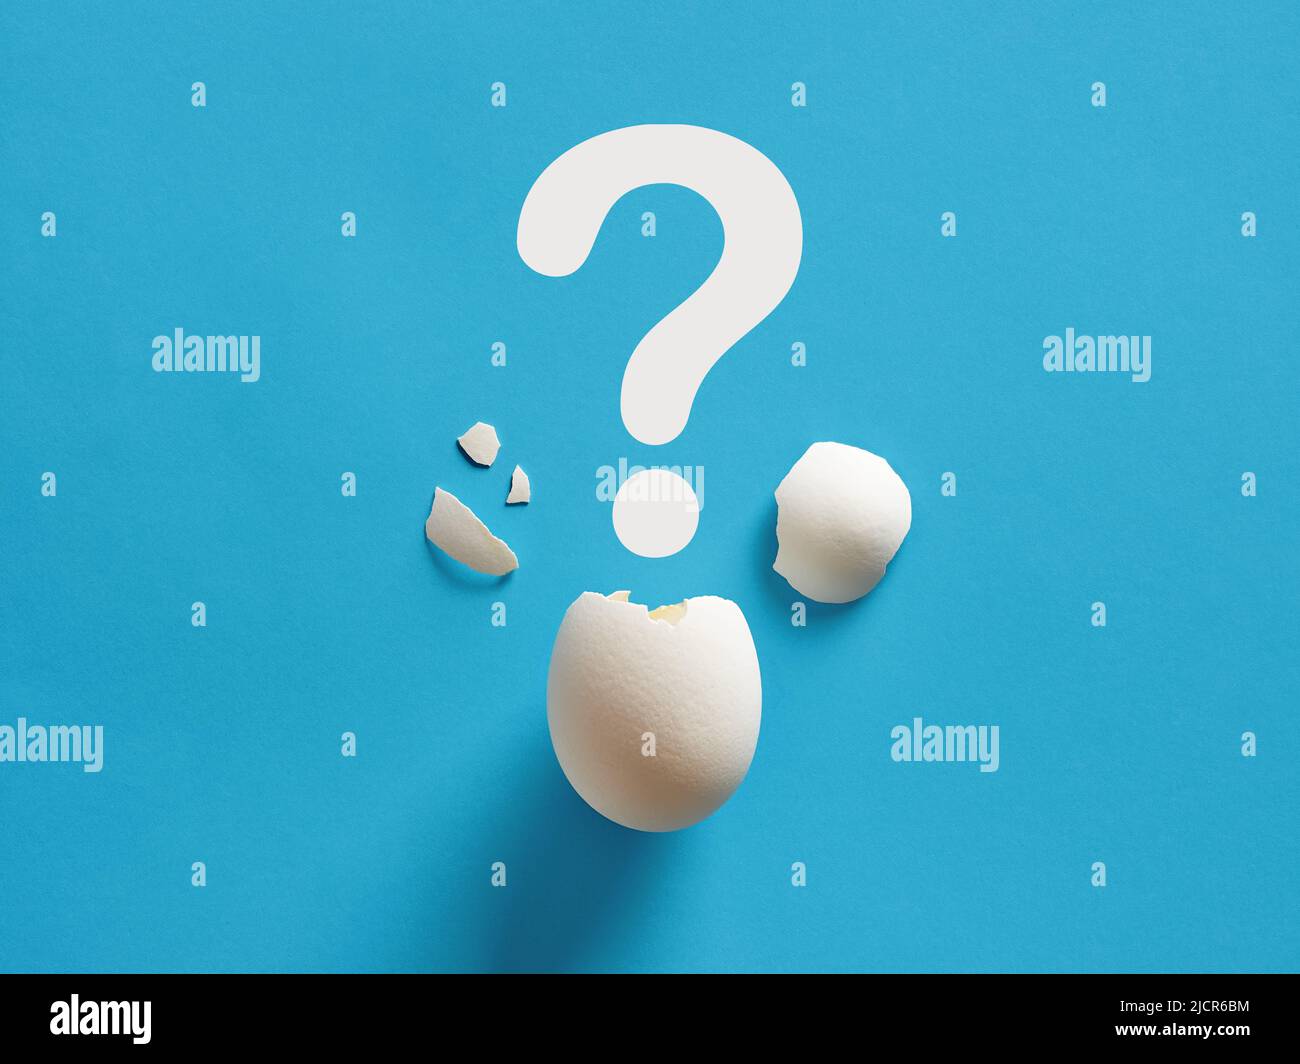 Cracked white chicken egg shell with question mark symbol. Surprise, mystery, uncertainty or baby gender prediction concepts. Stock Photo